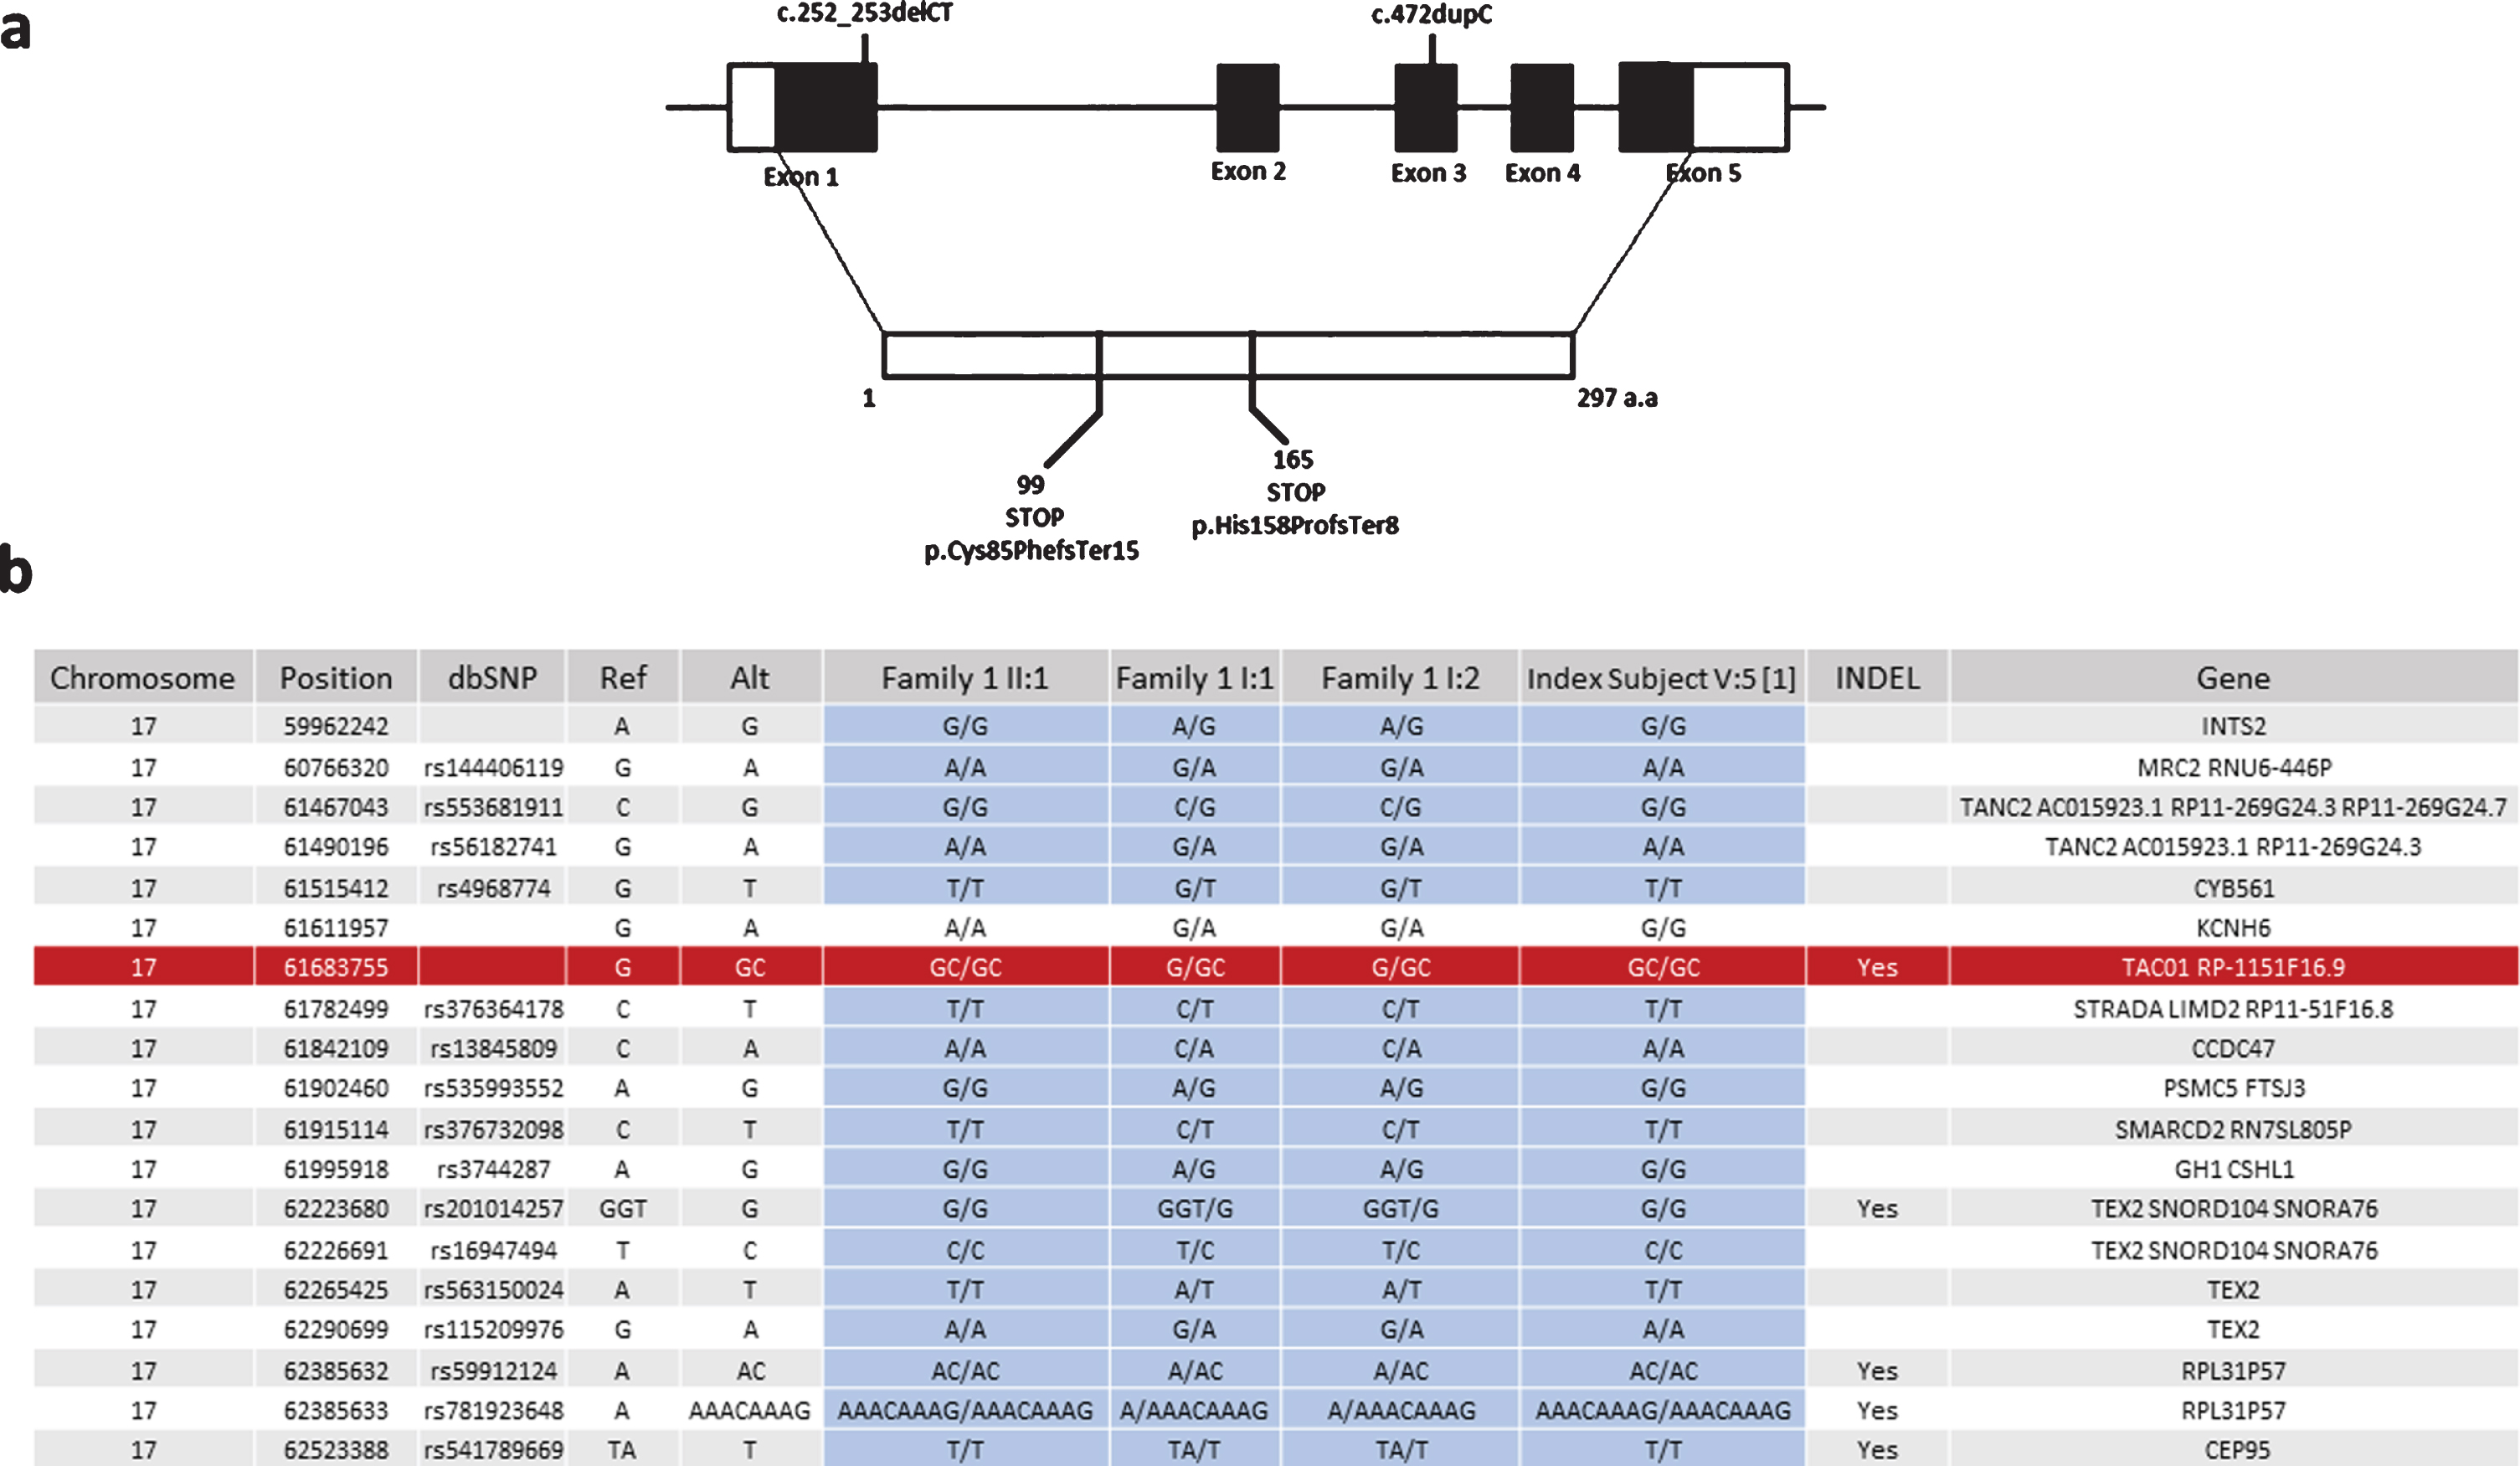 Schematic representation of exon-intron structure of TACO1 and the mutations detected in our patients. (a) Schematic representation of exon-intron structure of the TACO1 gene and the reported mutations c.472insC (p.His158ProfsTer8) andc.252_253delCT (p.Cys85PhefsTer15). (b) Haplotype analysis of the SNPs in the proximity of the c.472insC (p.His158ProfsTer8) mutation suggesting a founder effect for this variant.